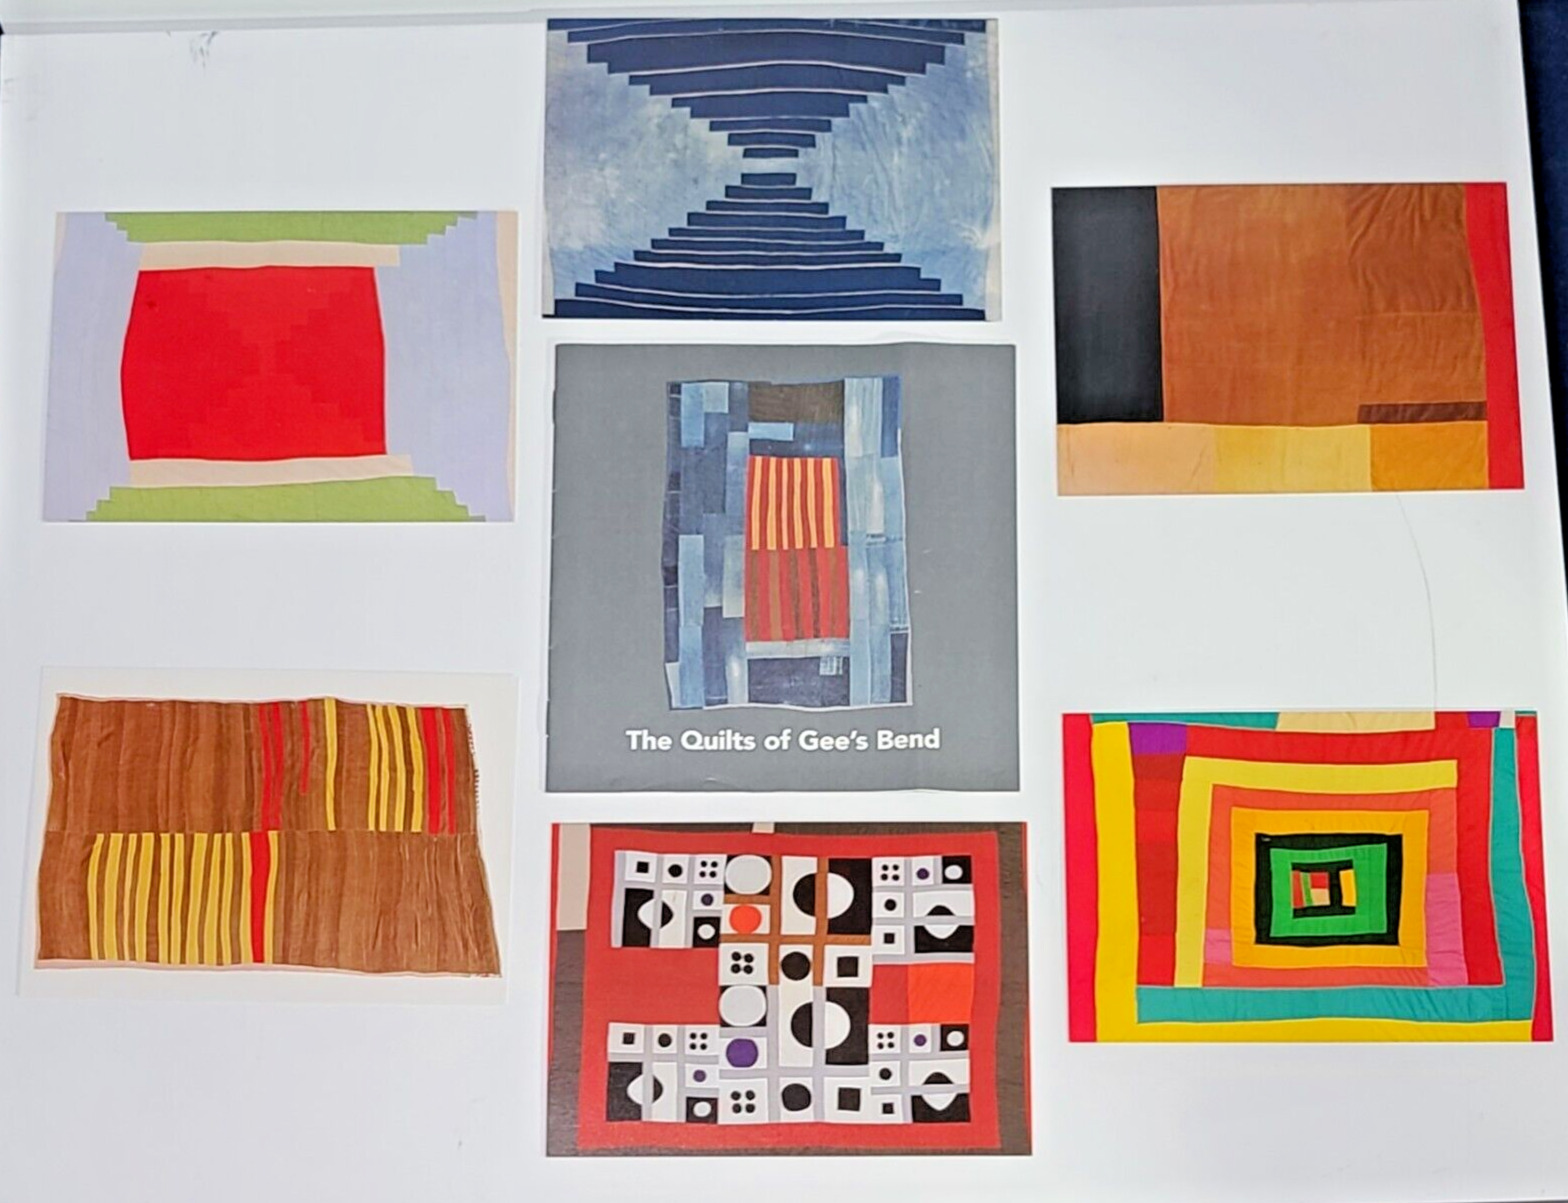 Lot of 6 Quilts of Gee\'s Bend Postcards + Corcoran Gallery, DC Exhibition Guide